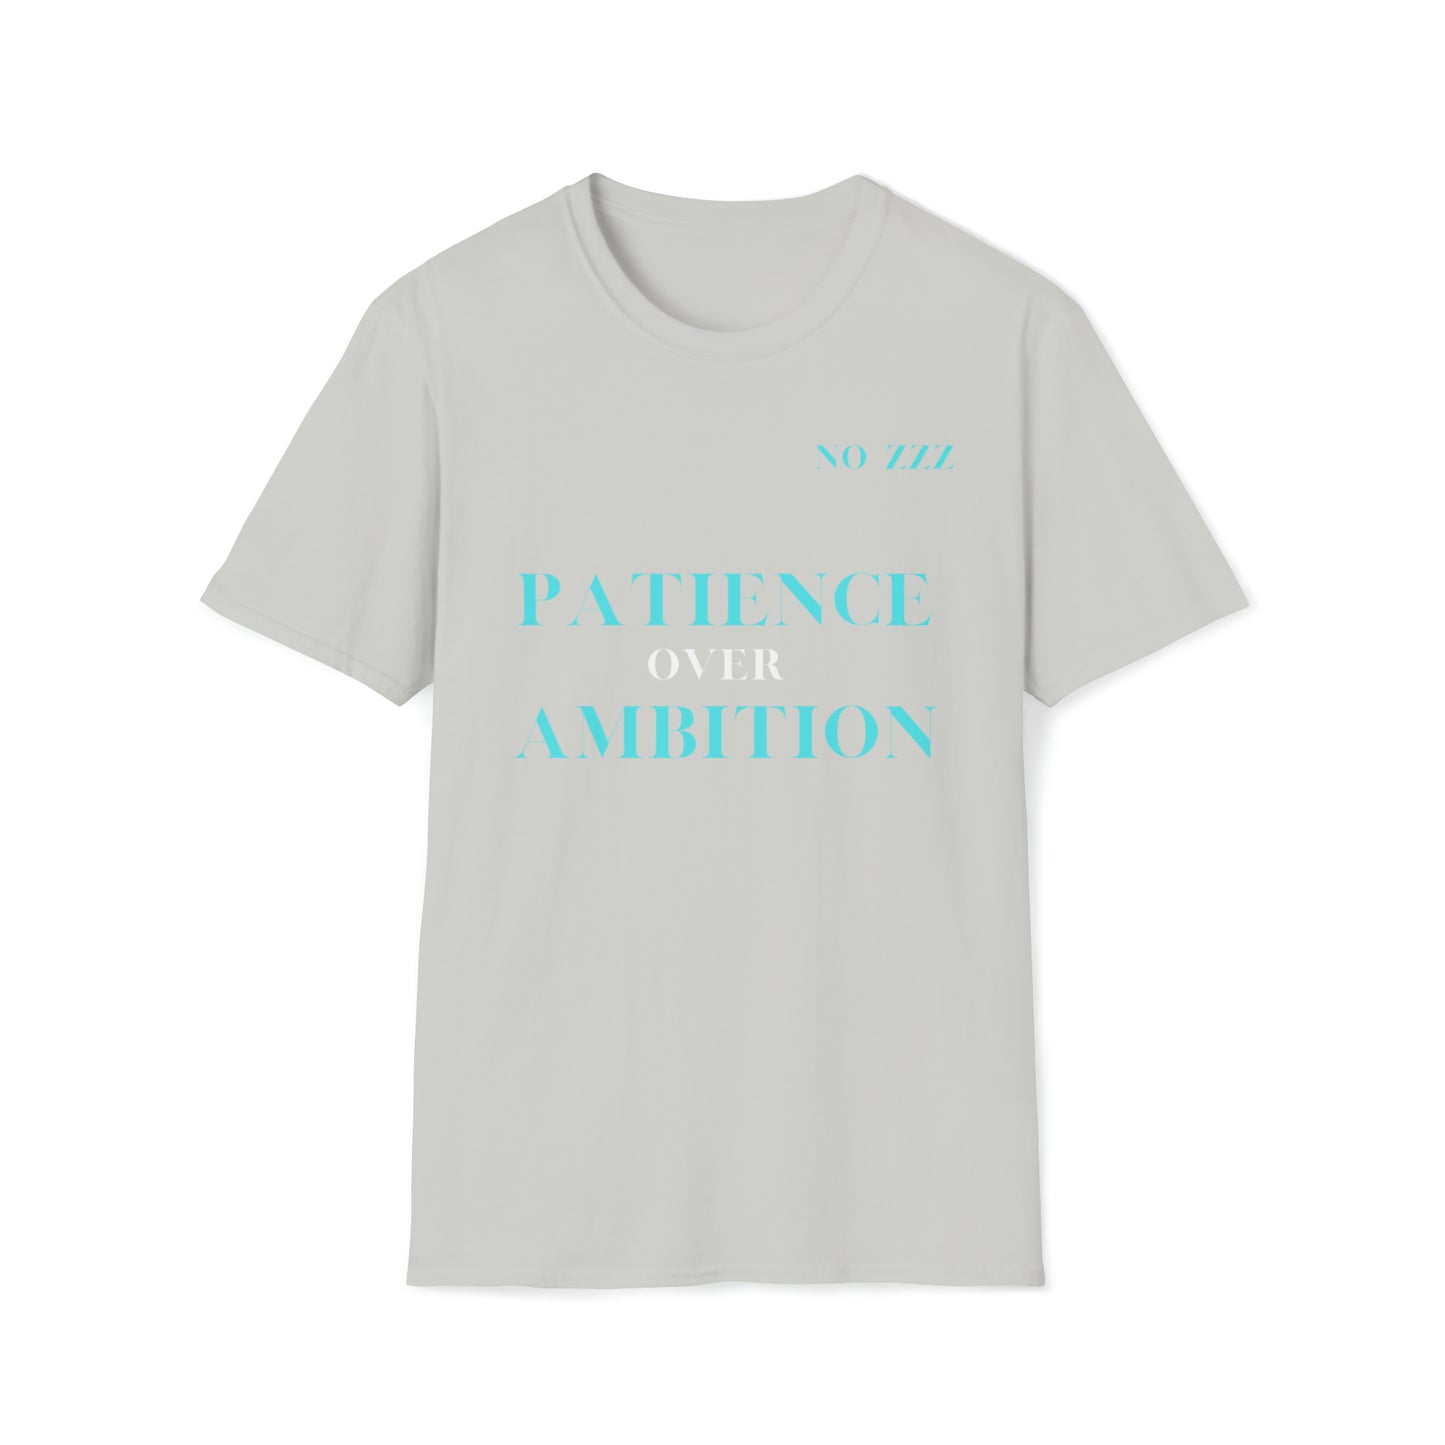 Patience over Ambition London Edition